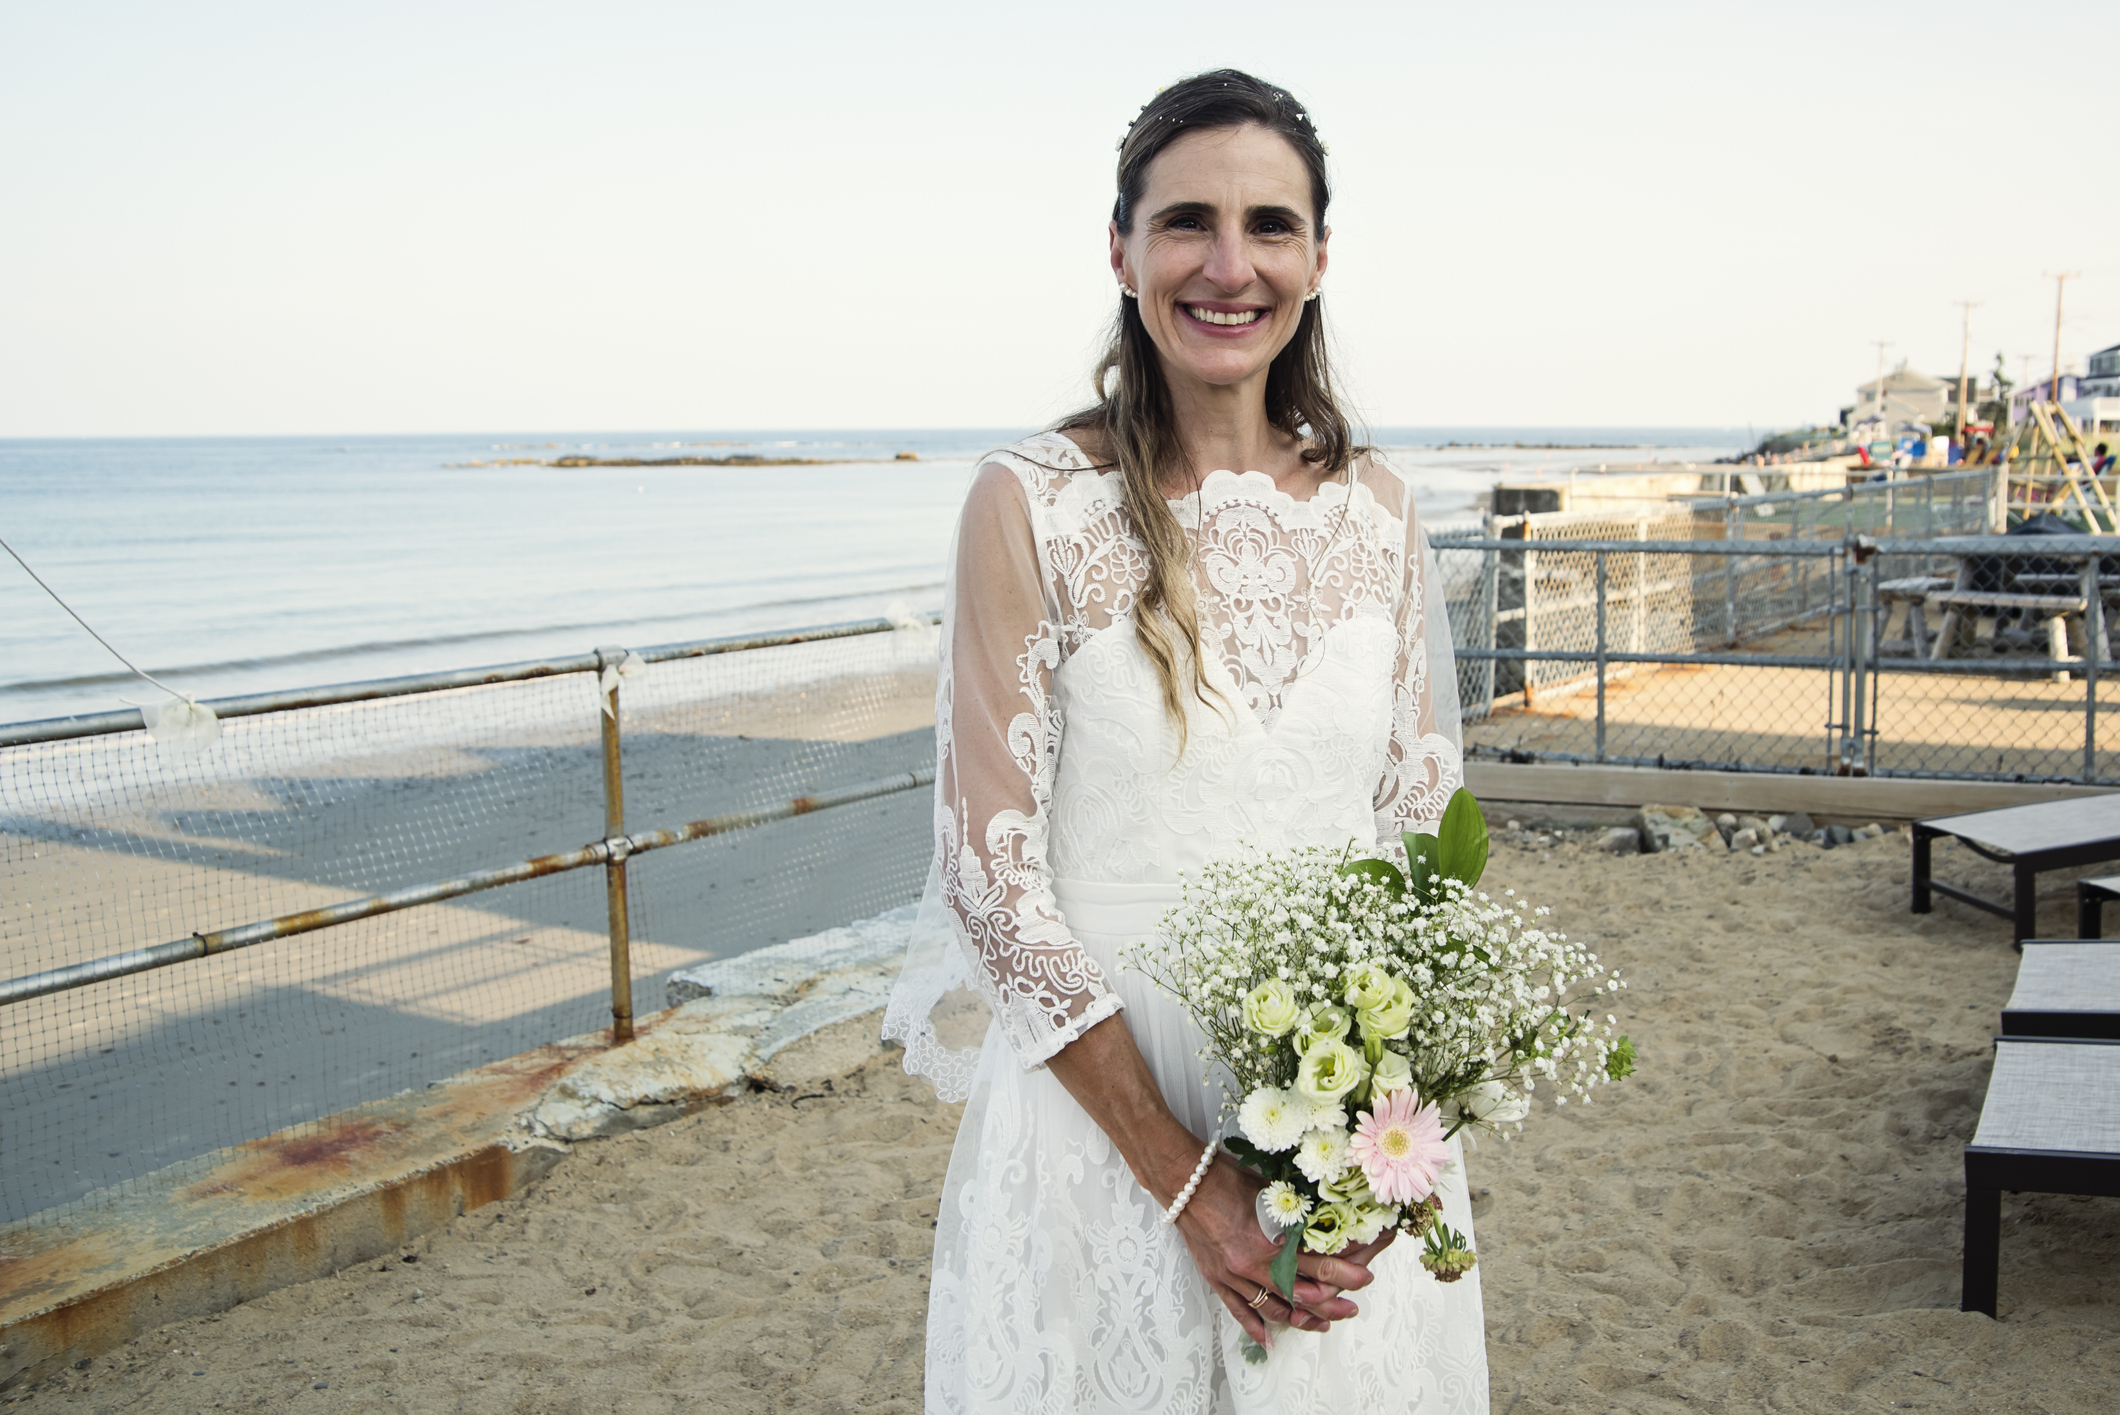 A woman in a bridal gown holding a bouquet of flowers by the beach